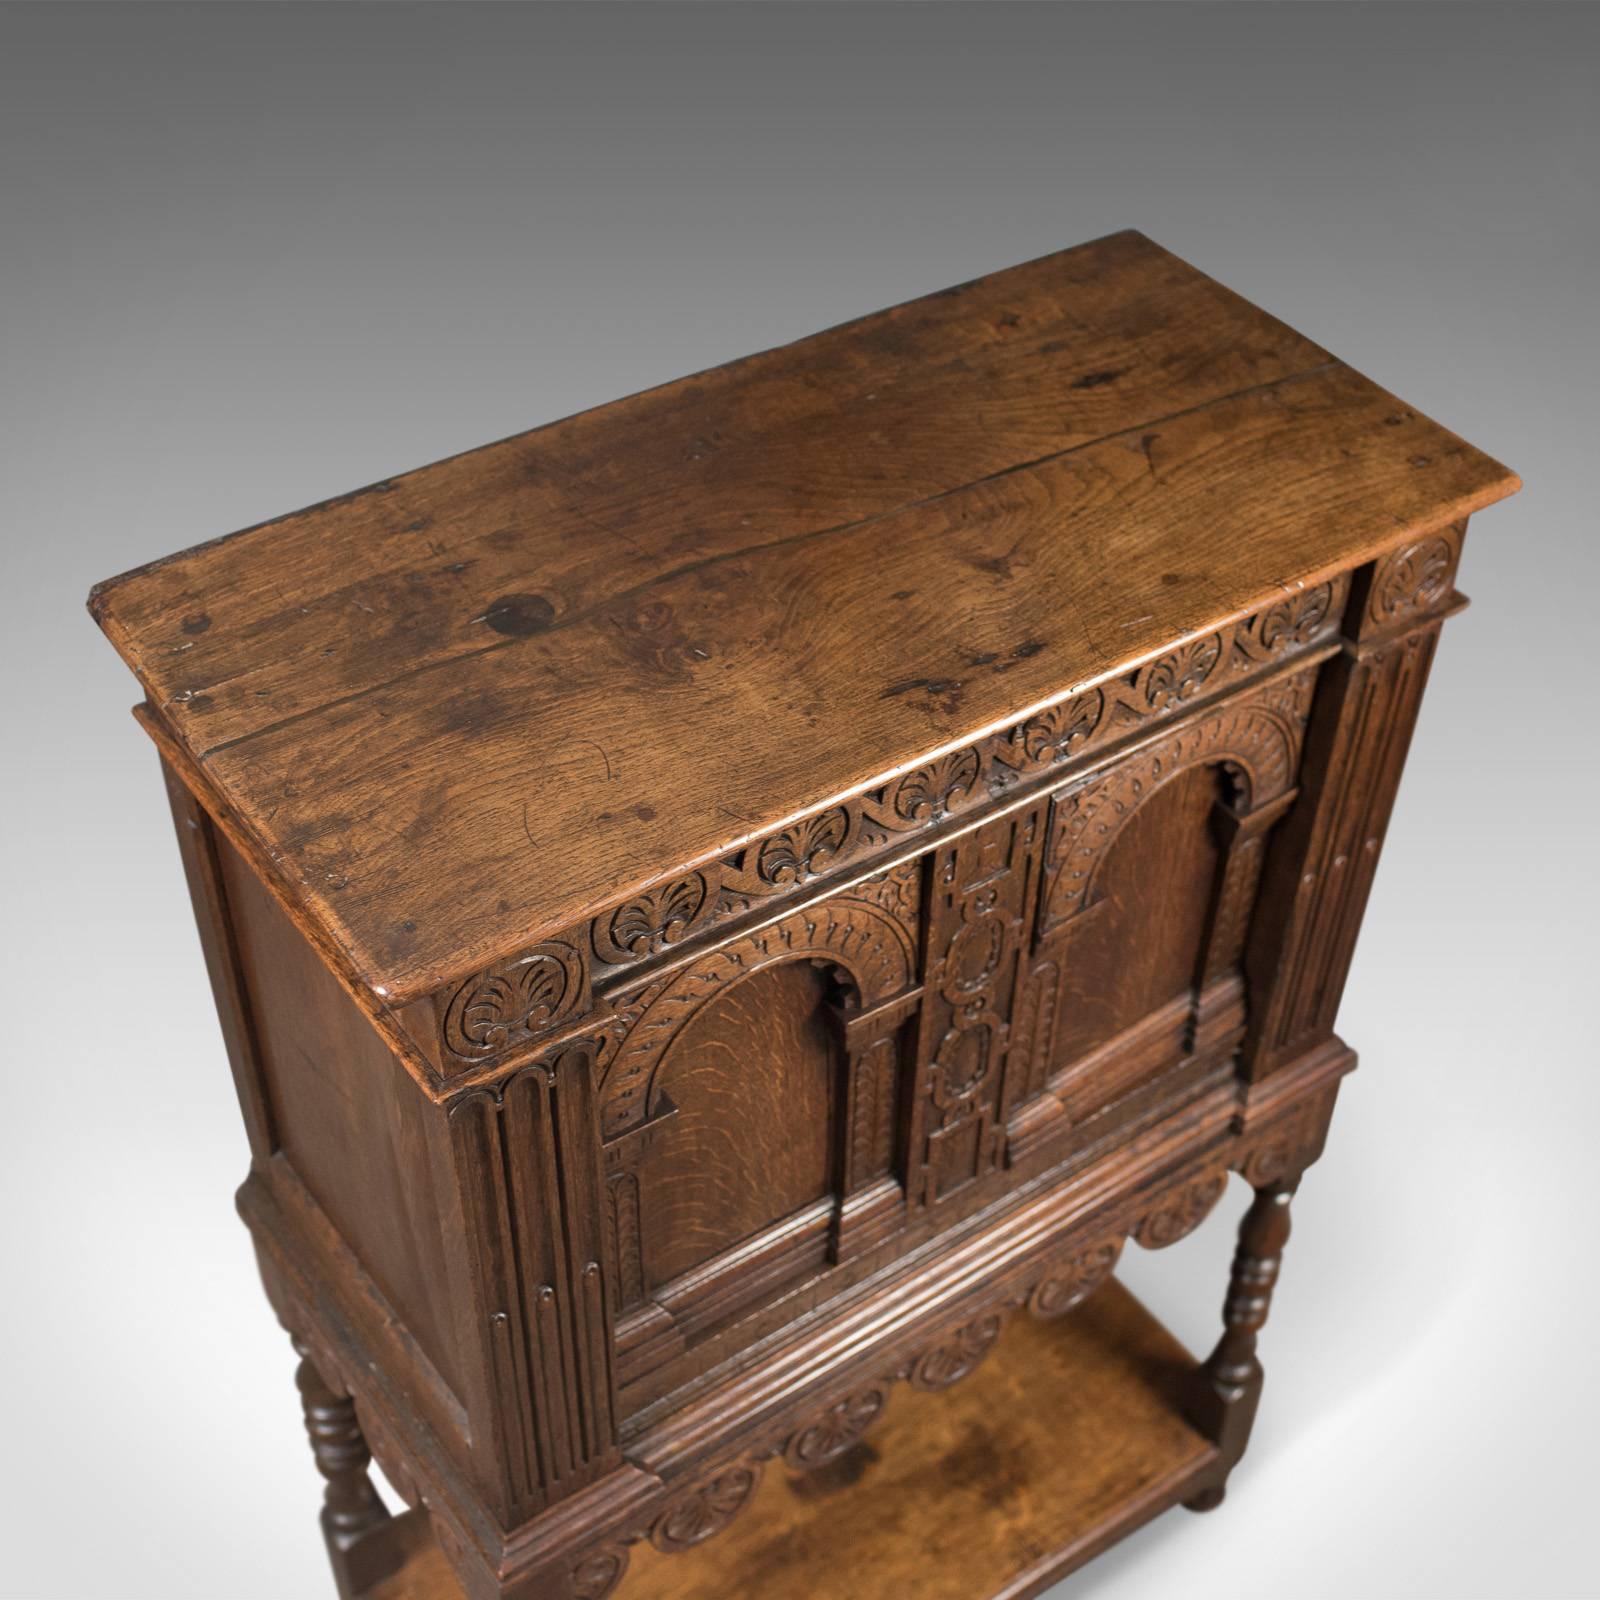 19th Century Victorian Antique Livery Cupboard in the 17th Century Taste, English, Oak